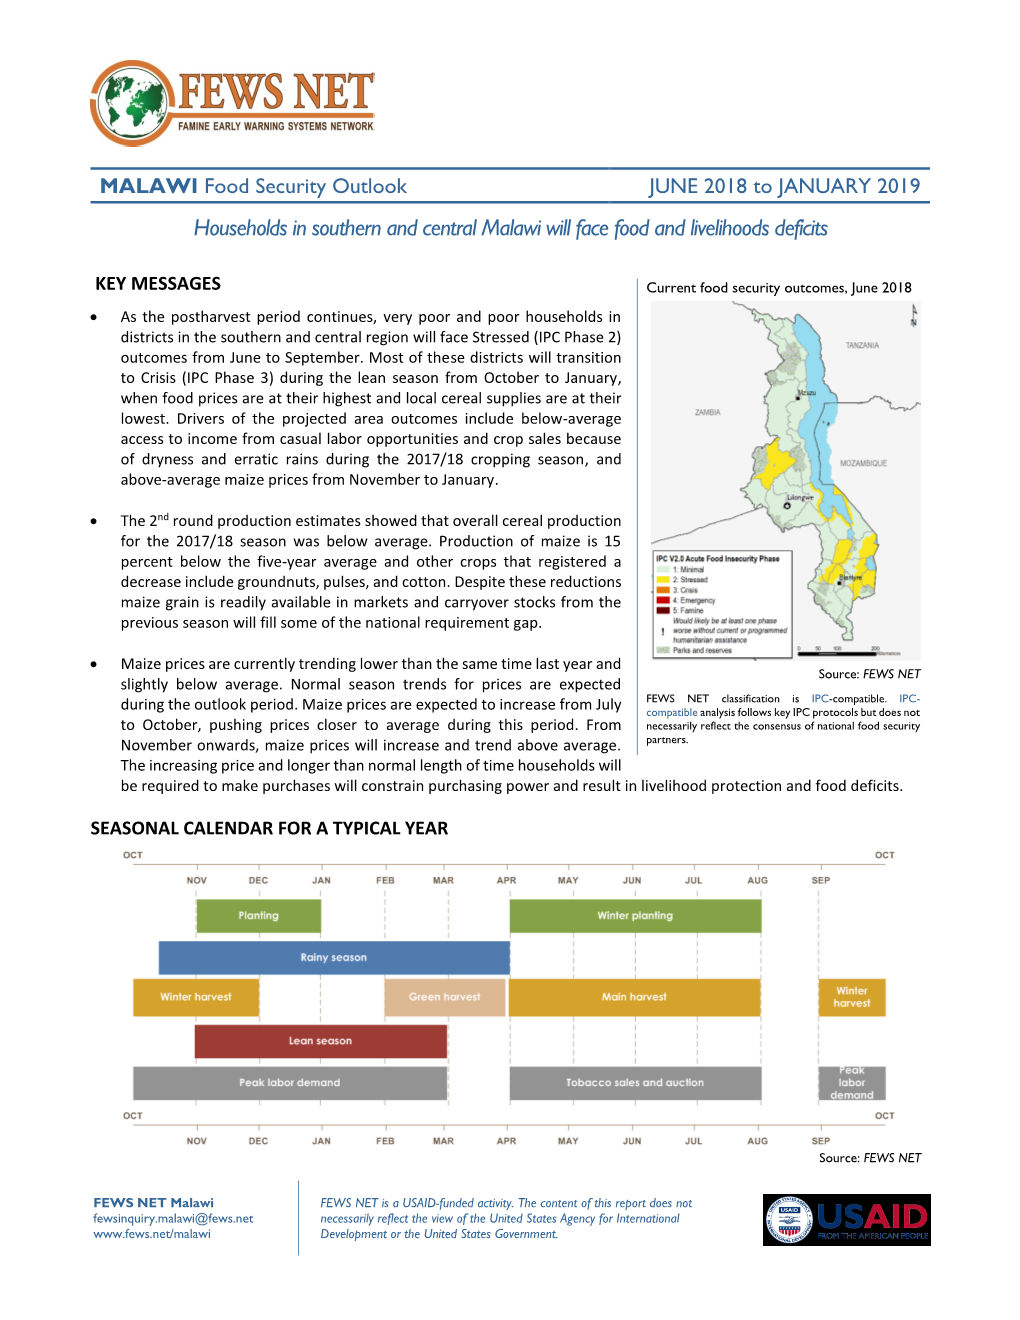 JUNE 2018 to JANUARY 2019 Households in Southern and Central Malawi Will Face Food and Livelihoods Deficits